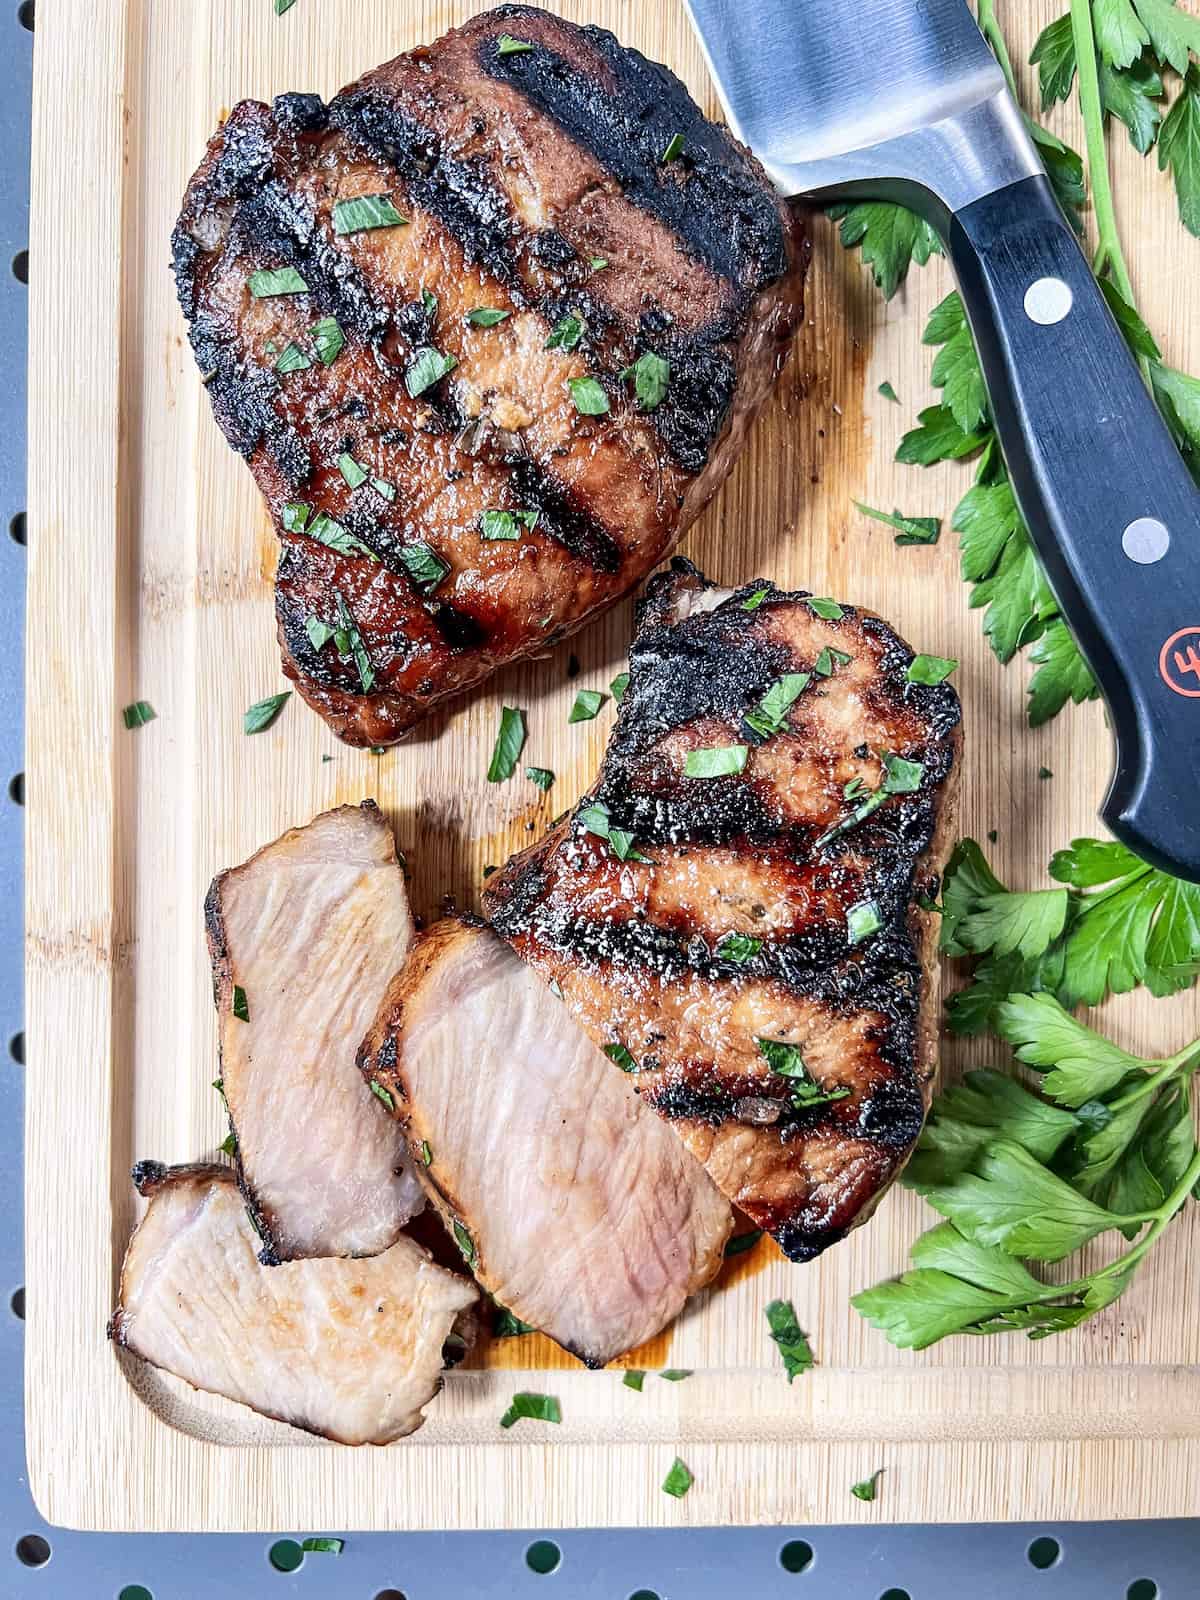 Grilled pork chops, garnished with parsley, on a wood cutting board with a knife. 